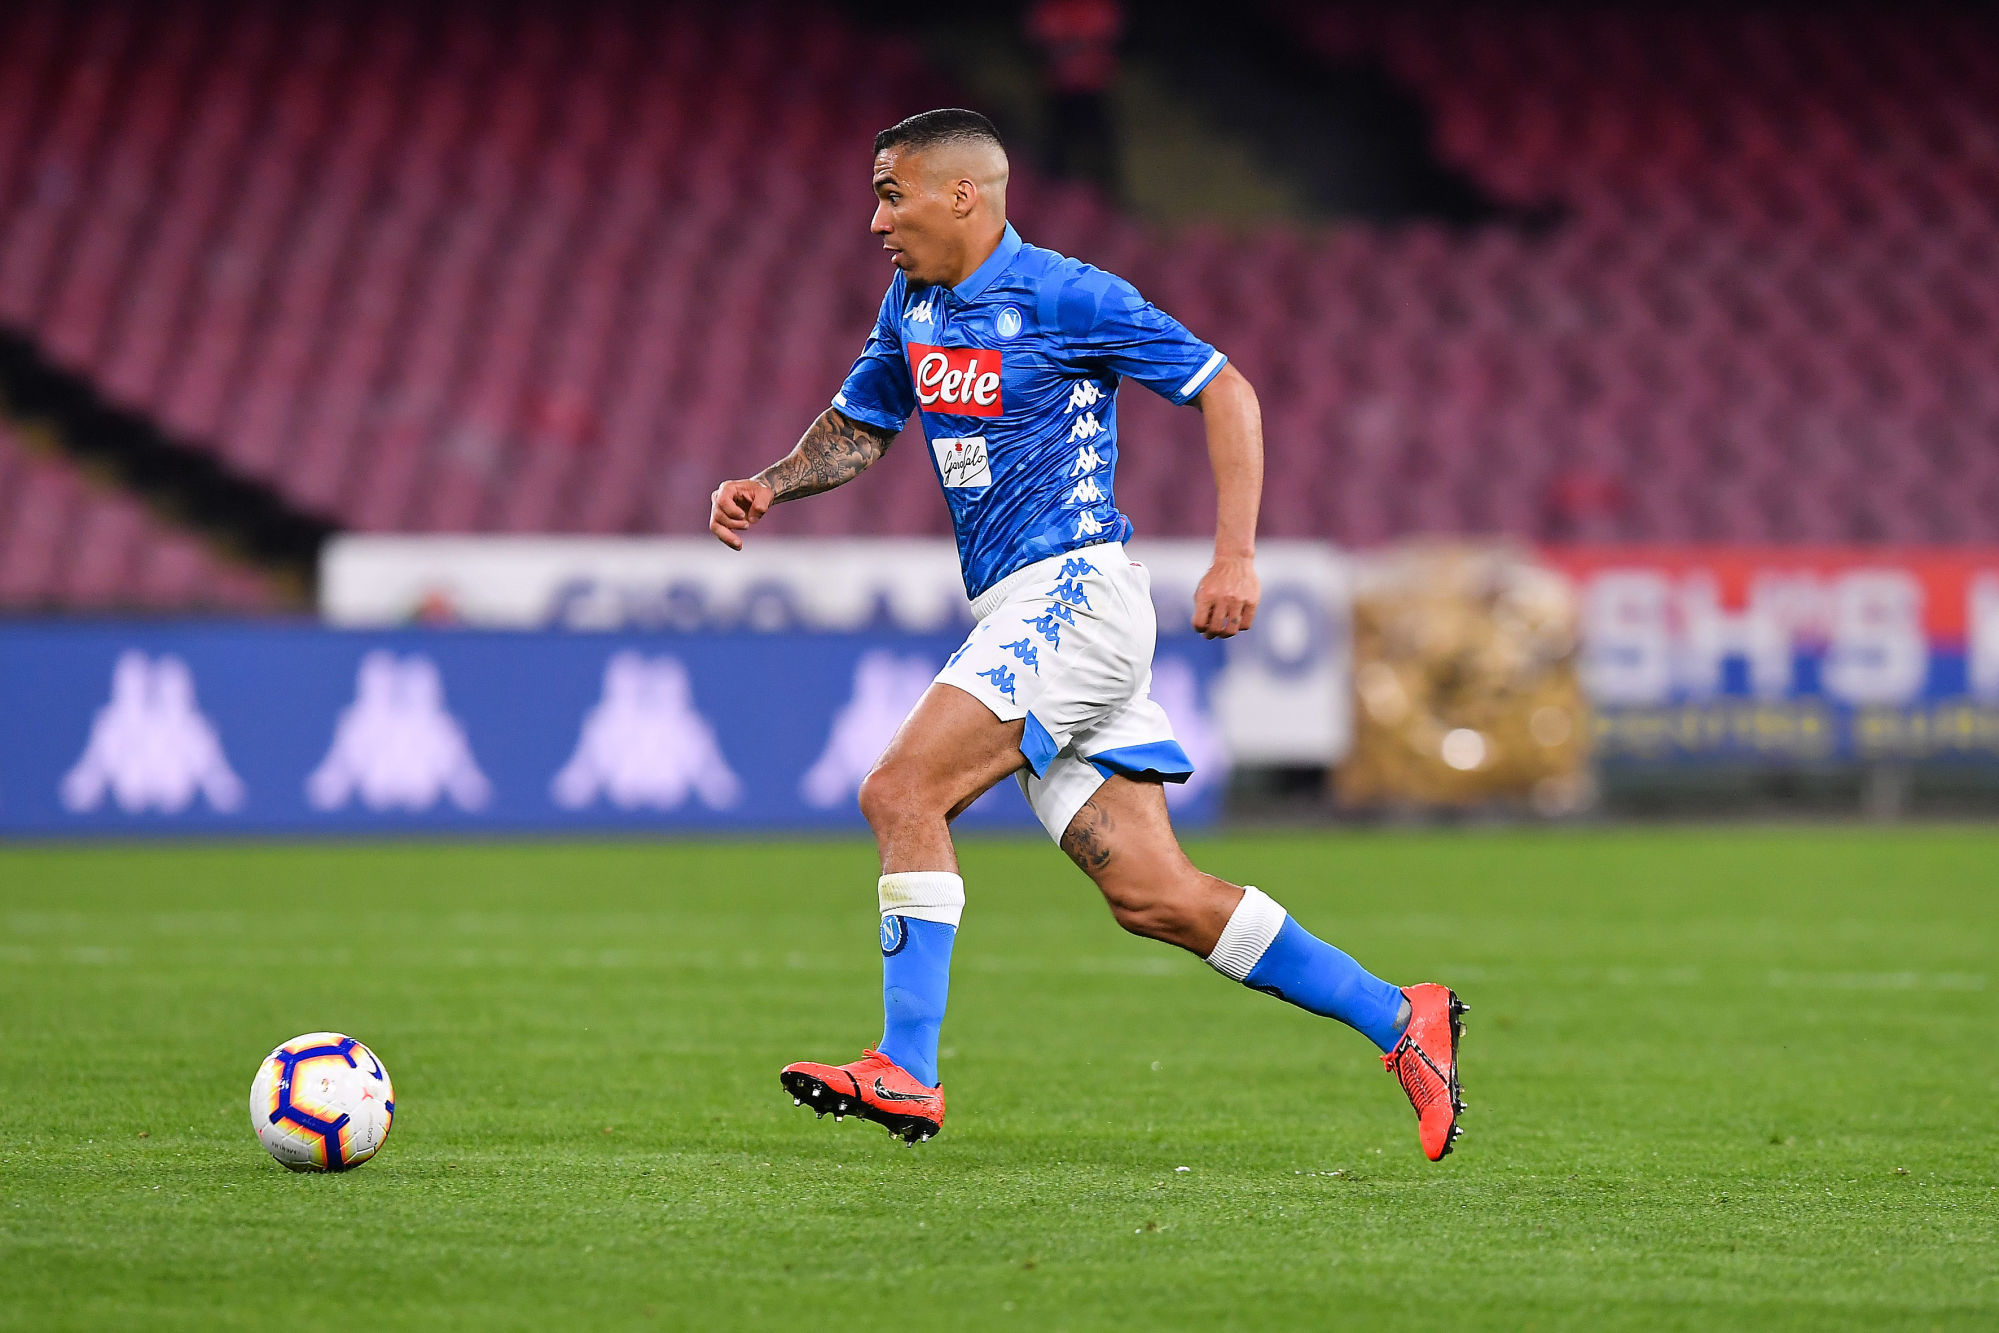 Marques Loureiro Allan (SSC Napoli) during the Serie A match between Napoli and Udinese on 17th March 2019'hoto : Cafaro / LaPresse / Icon Sport